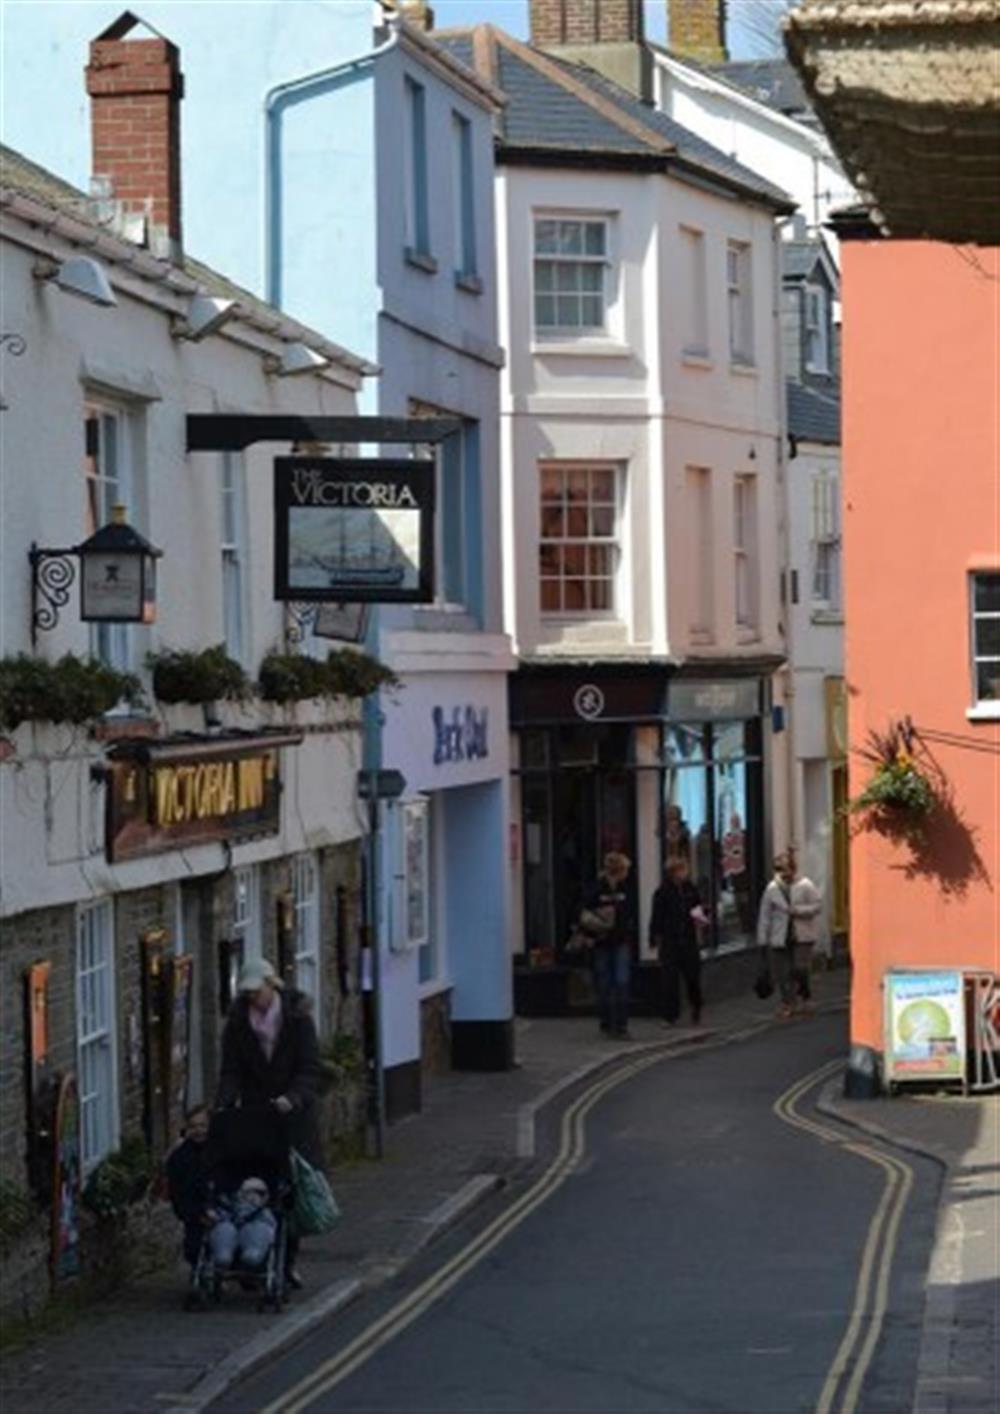 A great range of pubs, restaurants and shops within walking distance  at Fuchsia Cottage in Salcombe